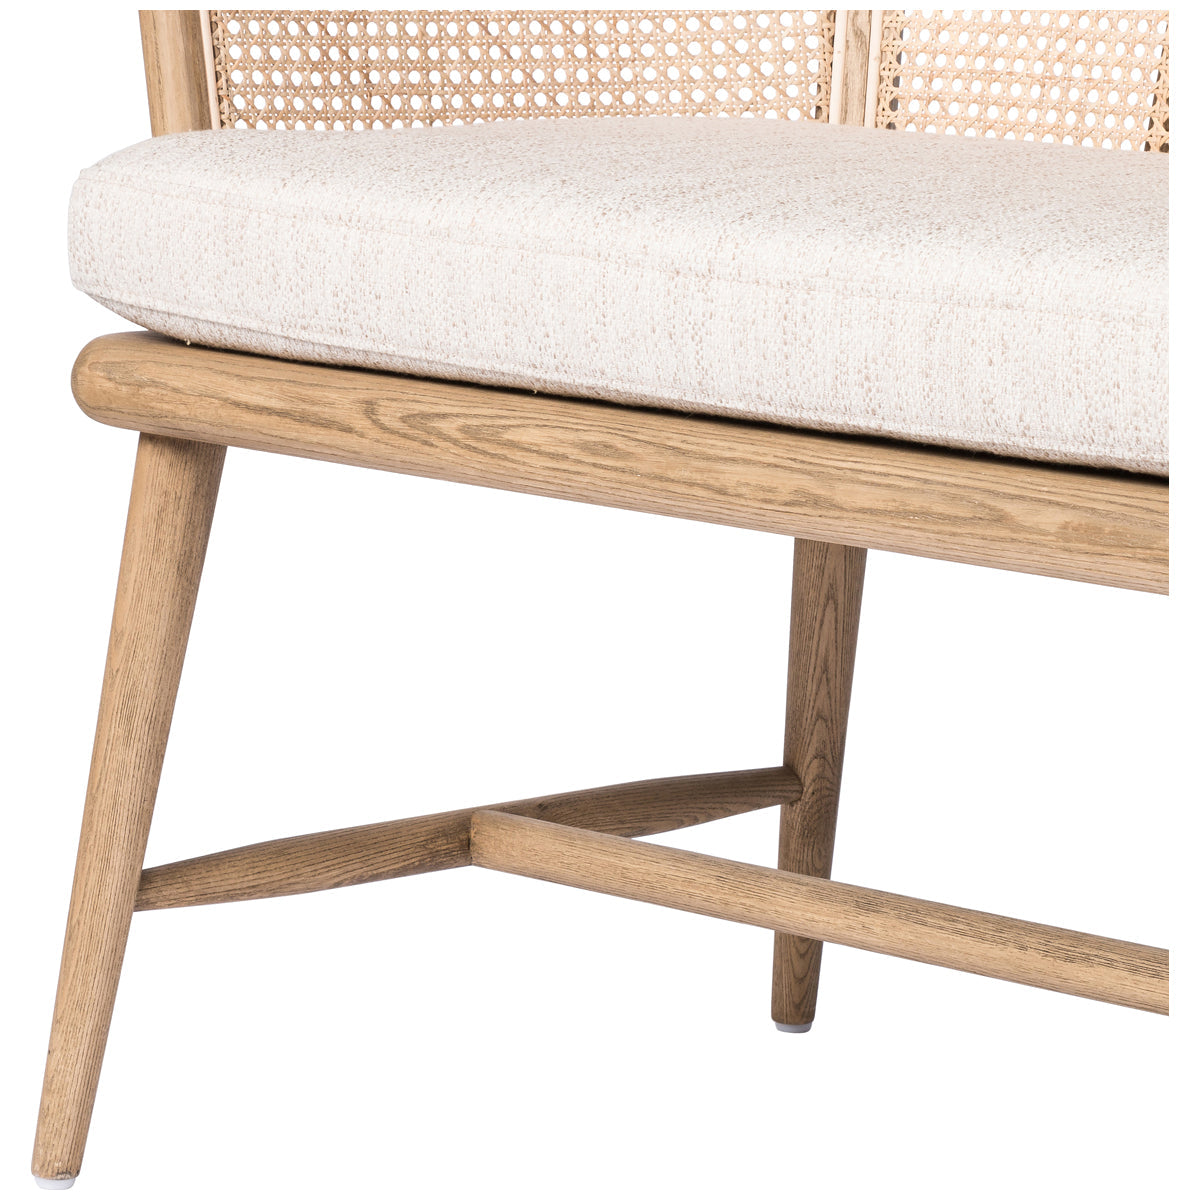 Four Hands Irondale Walter Accent Bench - Rustic Blonde